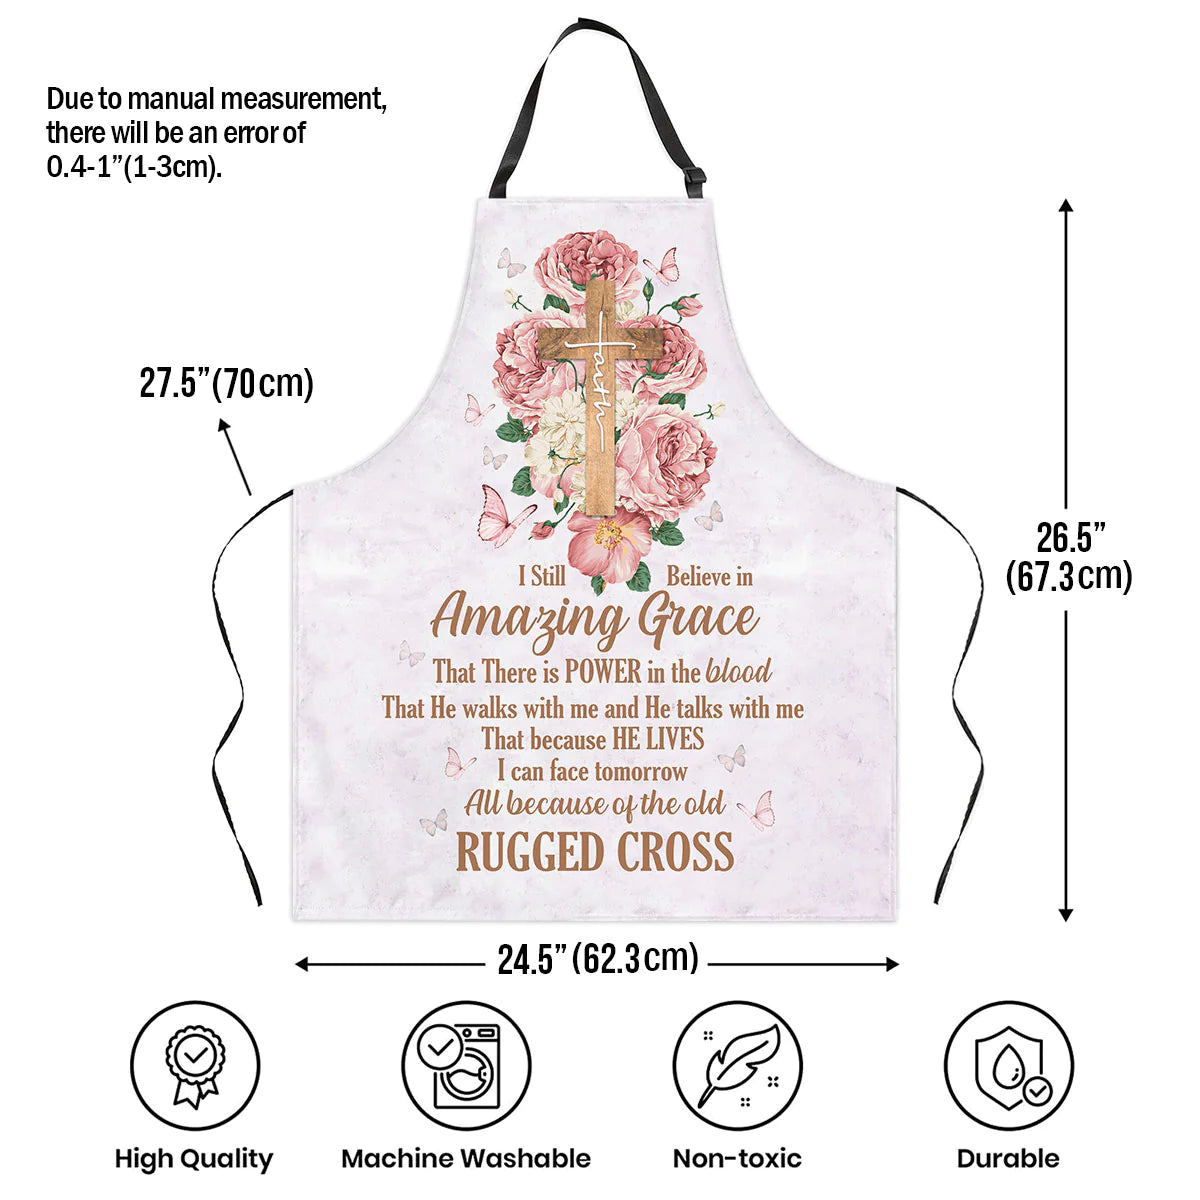 Christianartbag Apron, I Still Believe In Amazing Grace, Flower And Cross, Apron for Women, Gift For Women, Christmas Gift, - Christian Art Bag